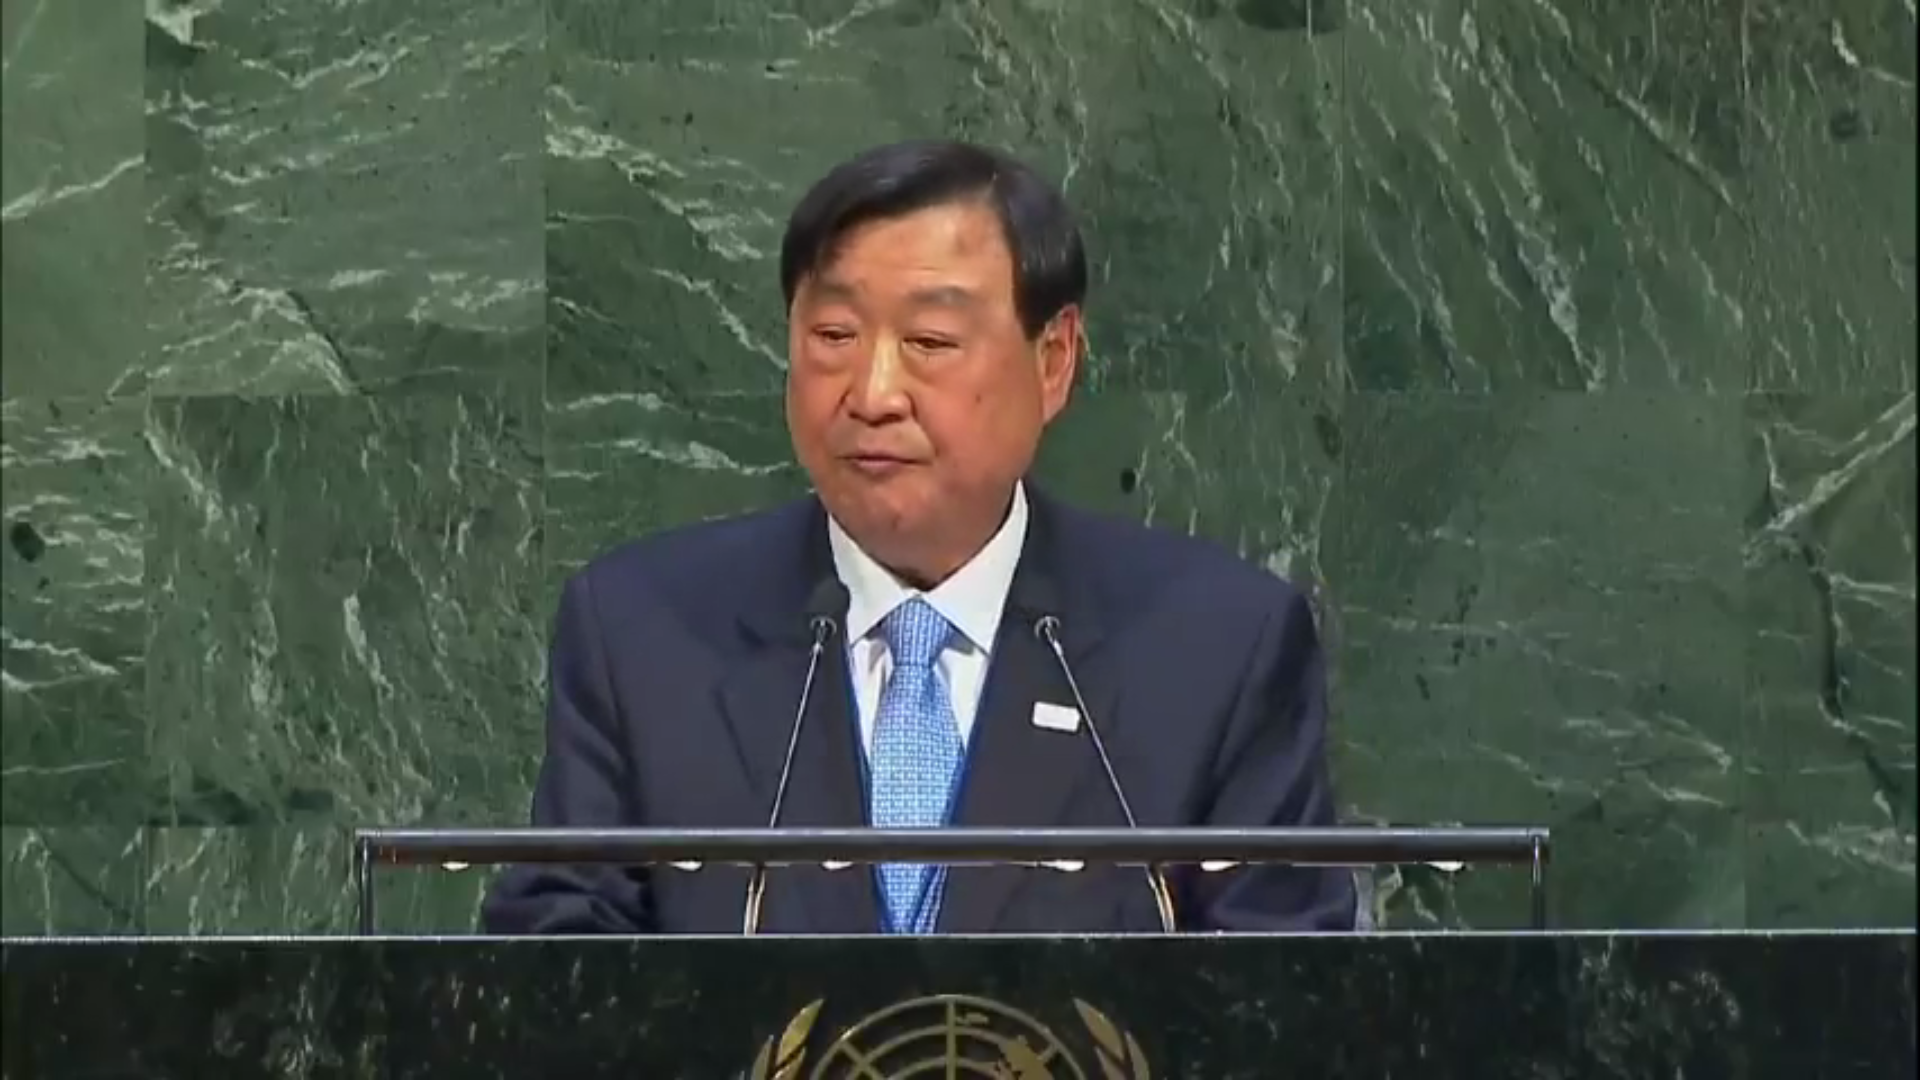 Pyeongchang 2018 President Lee Hee-beom presented at the United Nations ©Youtube